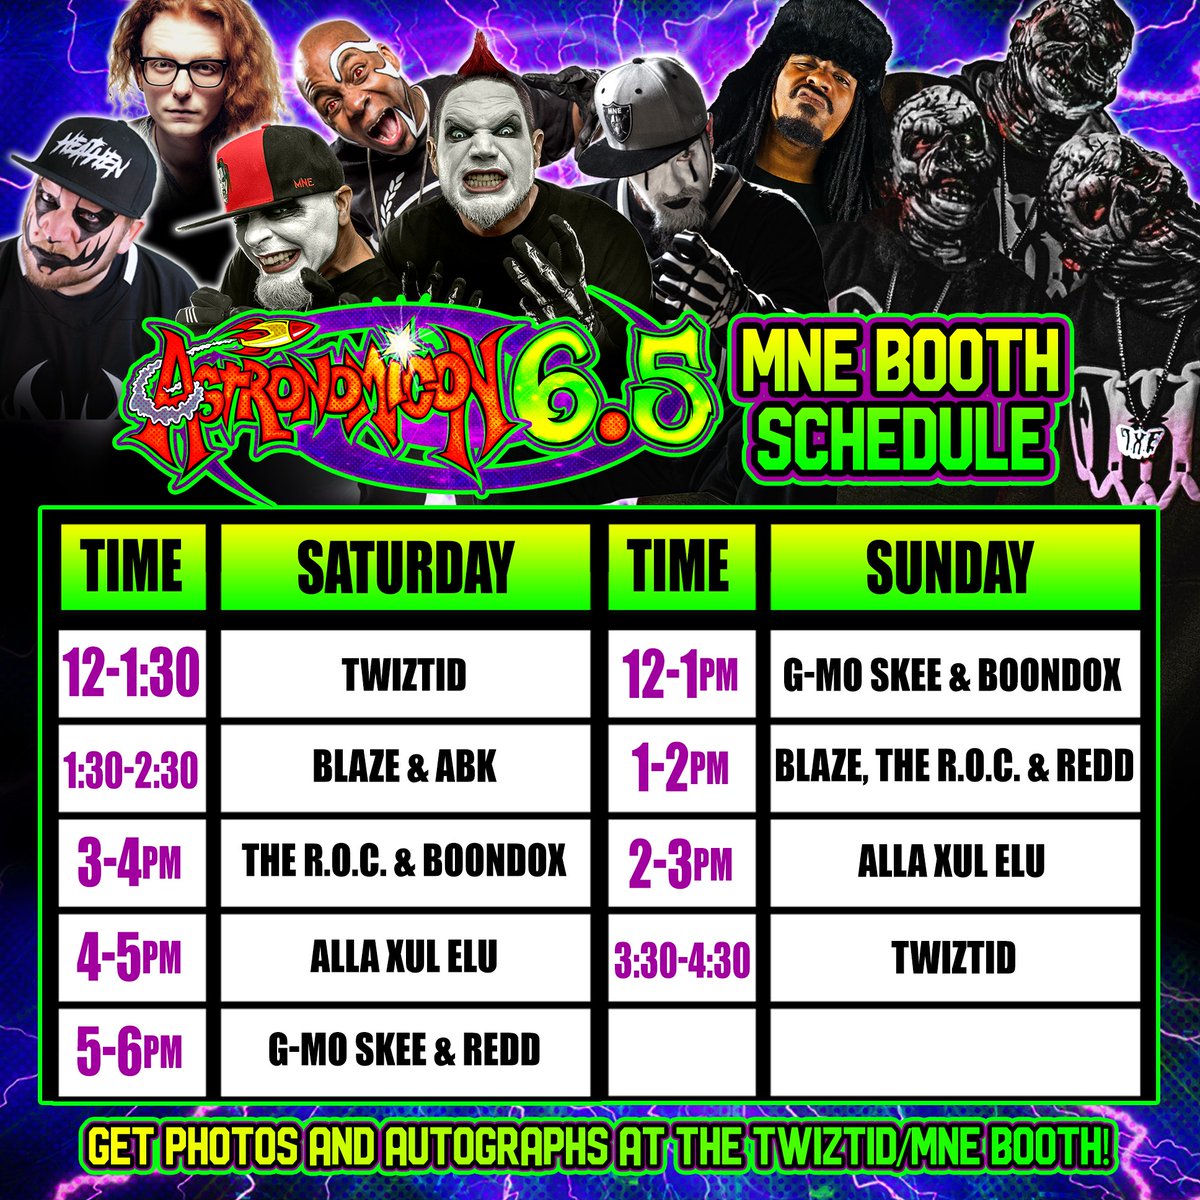 About to stroll on over to the MNE booth. Come say what up! #astronomicon